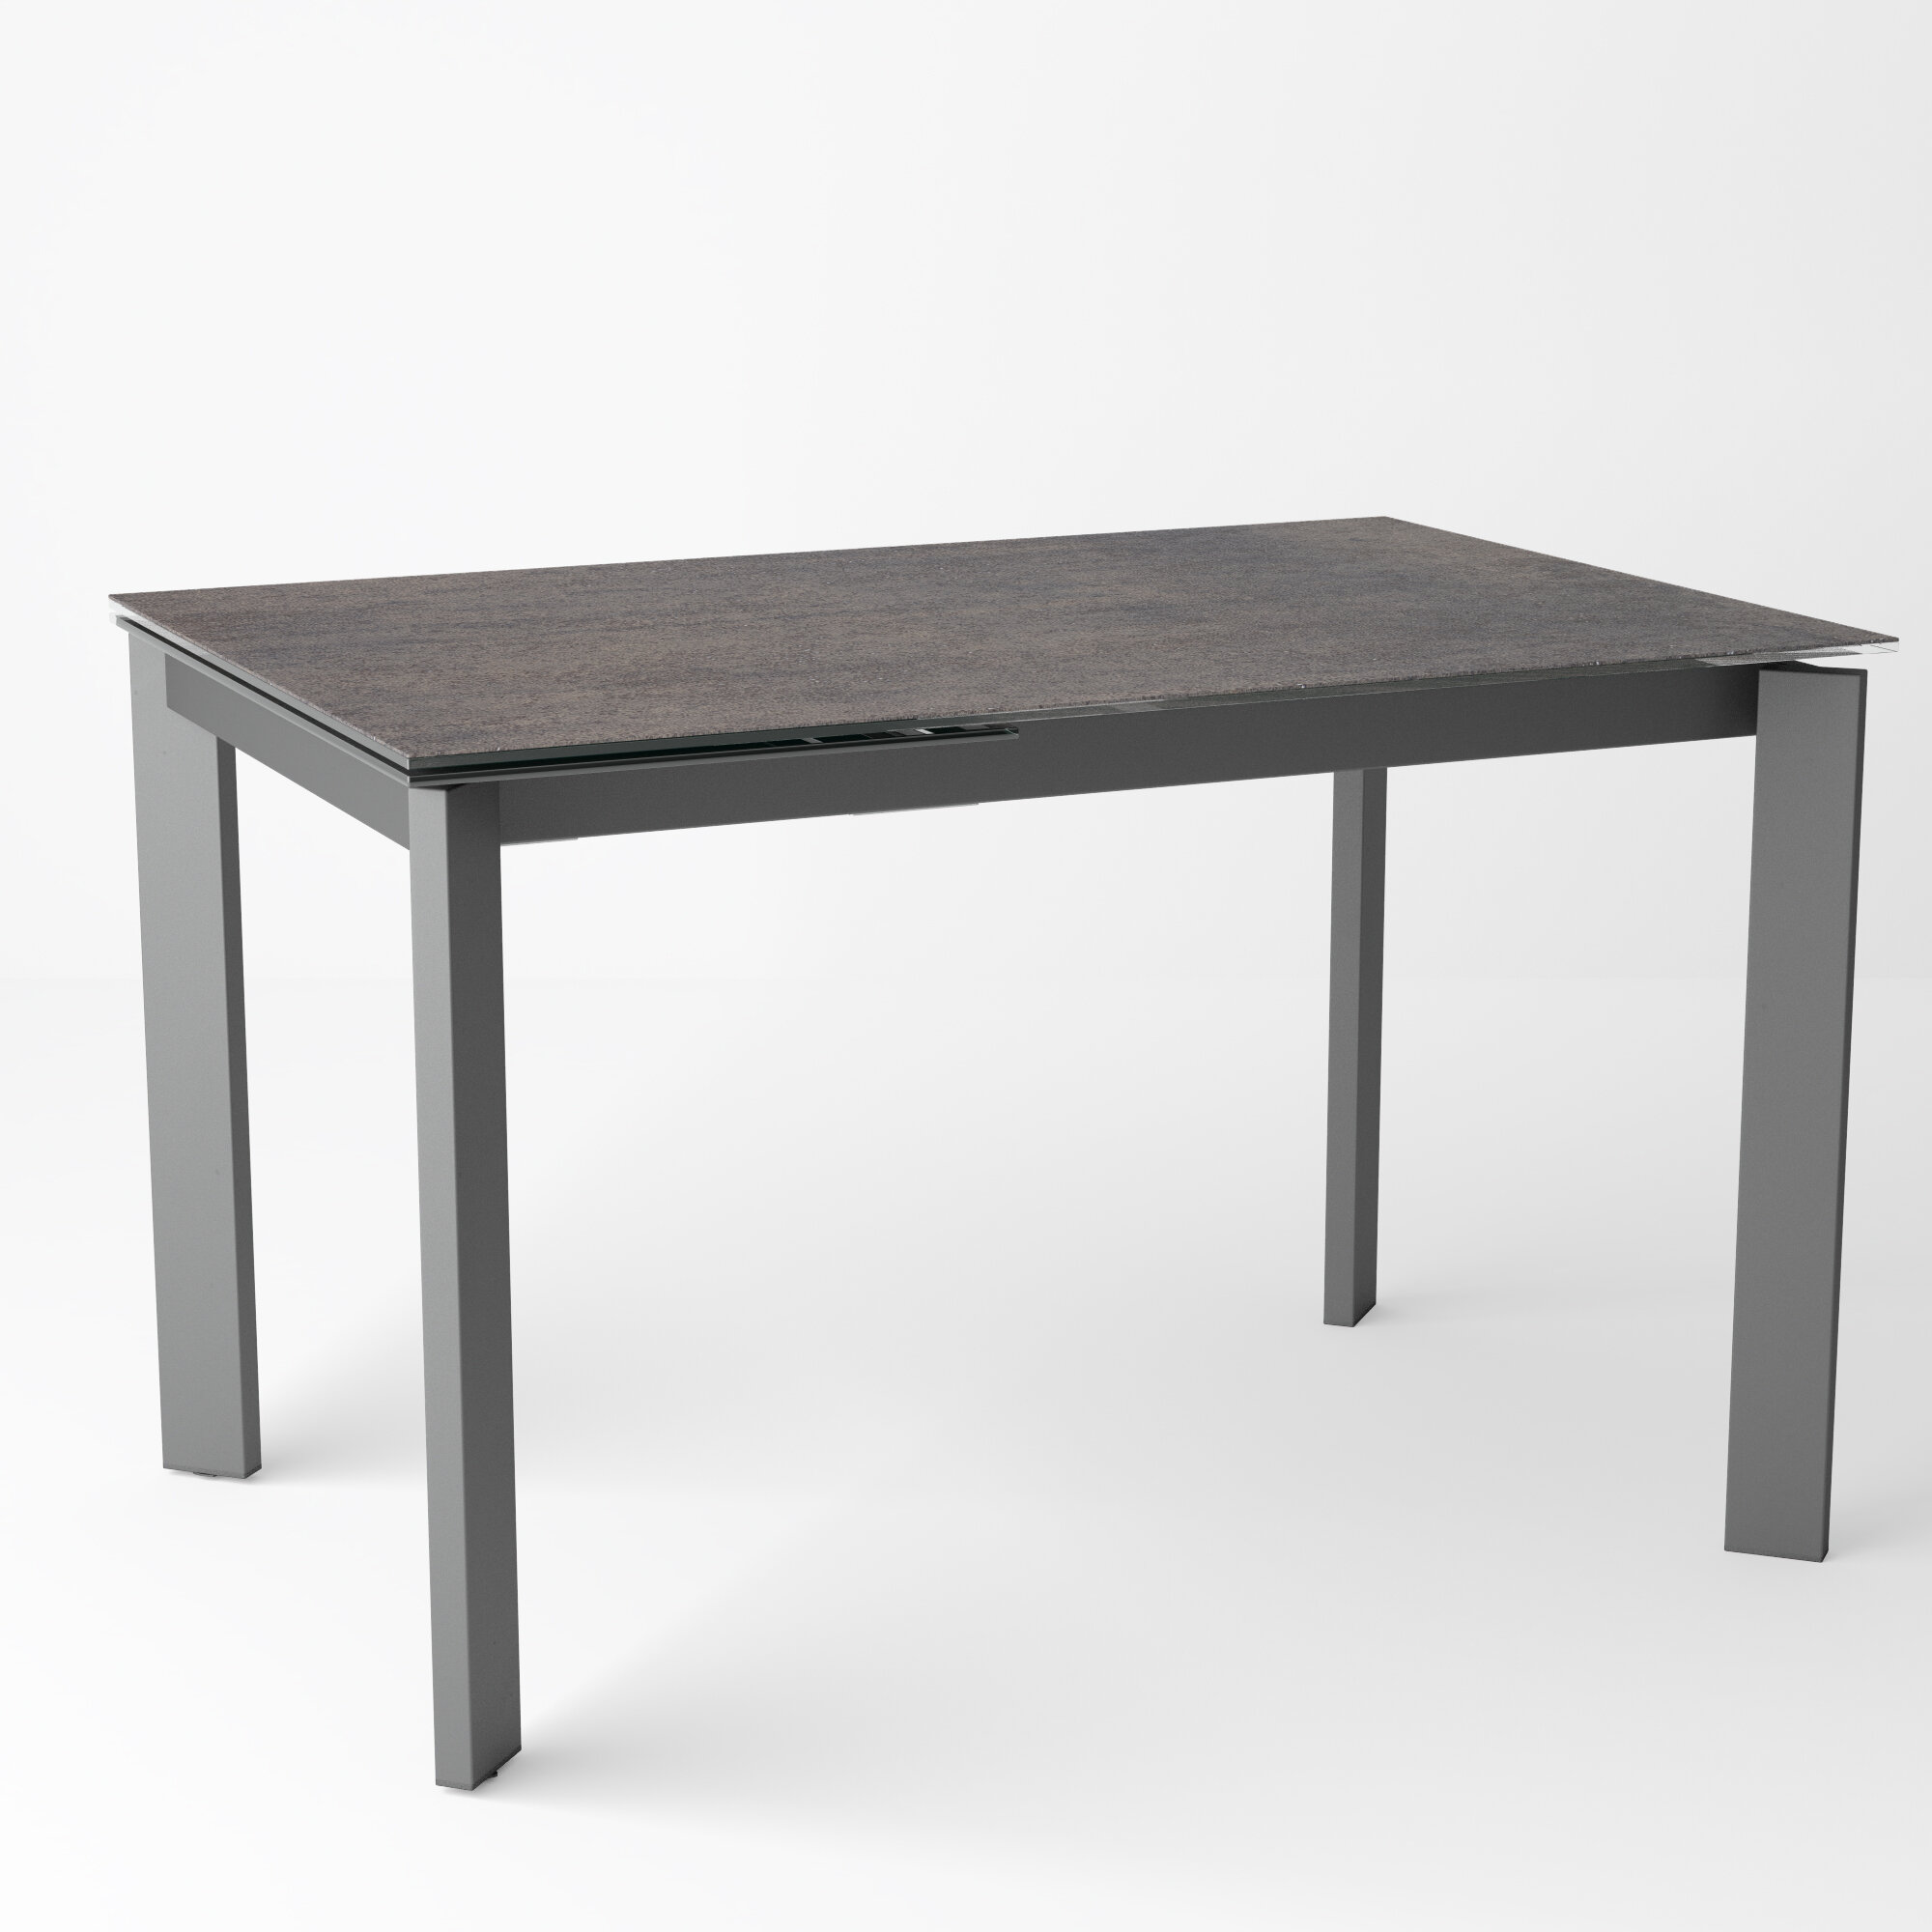 Best Info Dota2: Small Dining Room Tables That Extend